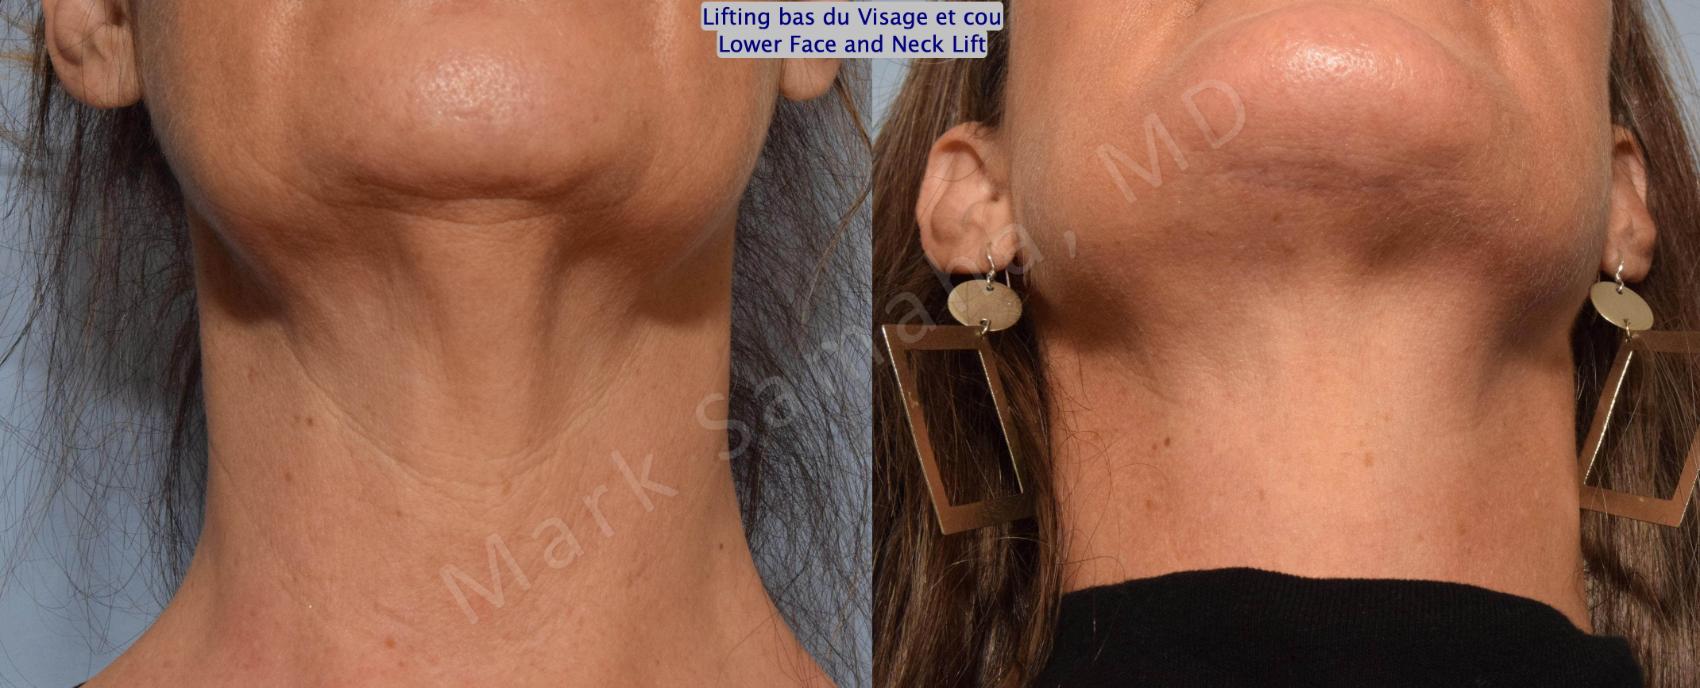 Before & After Lifting du visage / Cou - Facelift / Necklift Case 159 Neck Cou View in Montreal, QC